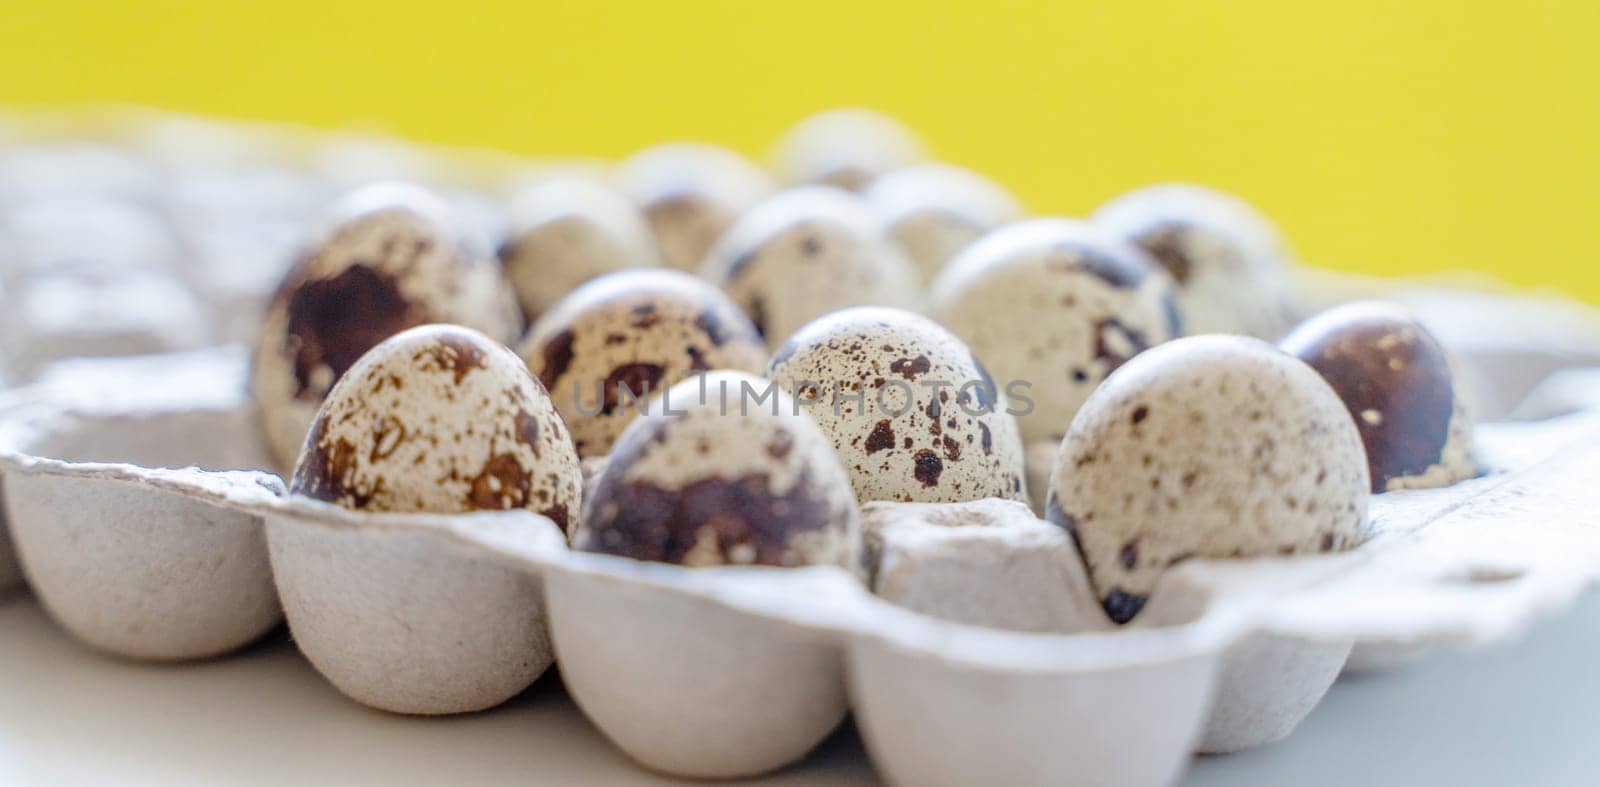 Spotted quail eggs in an egg box on a yellow background, natural eco friendly products